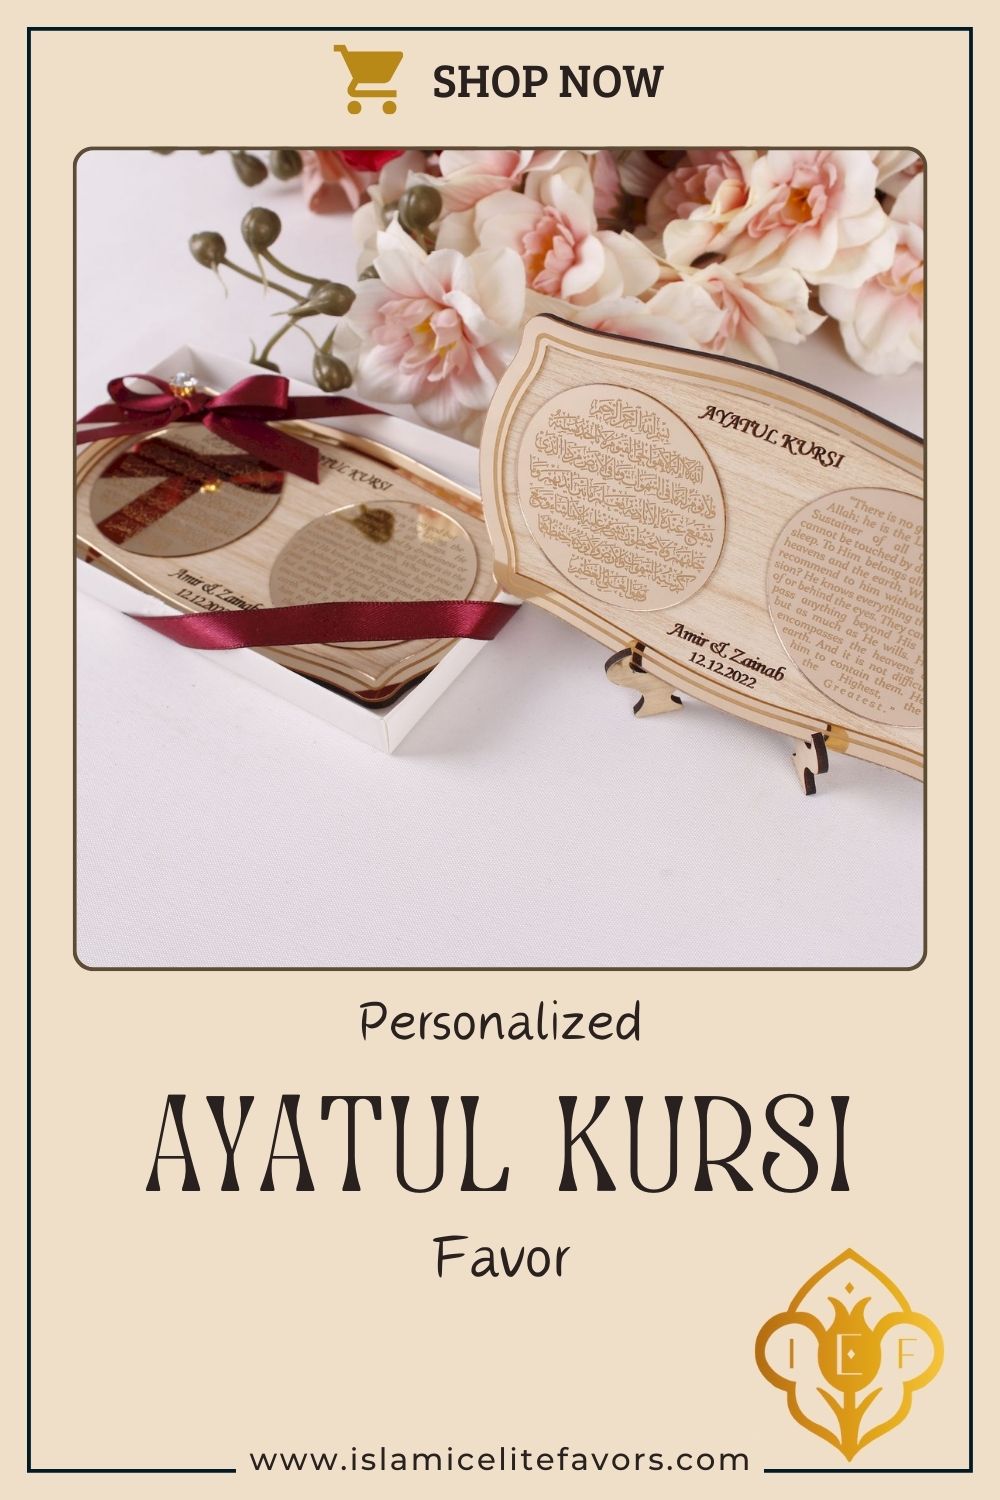 Personalized Wedding Favor Ayatul Kursi on Stand English Arabic Gold - Islamic Elite Favors is a handmade gift shop offering a wide variety of unique and personalized gifts for all occasions. Whether you're looking for the perfect Ramadan, Eid, Hajj, wedding gift or something special for a birthday, baby shower or anniversary, we have something for everyone. High quality, made with love.